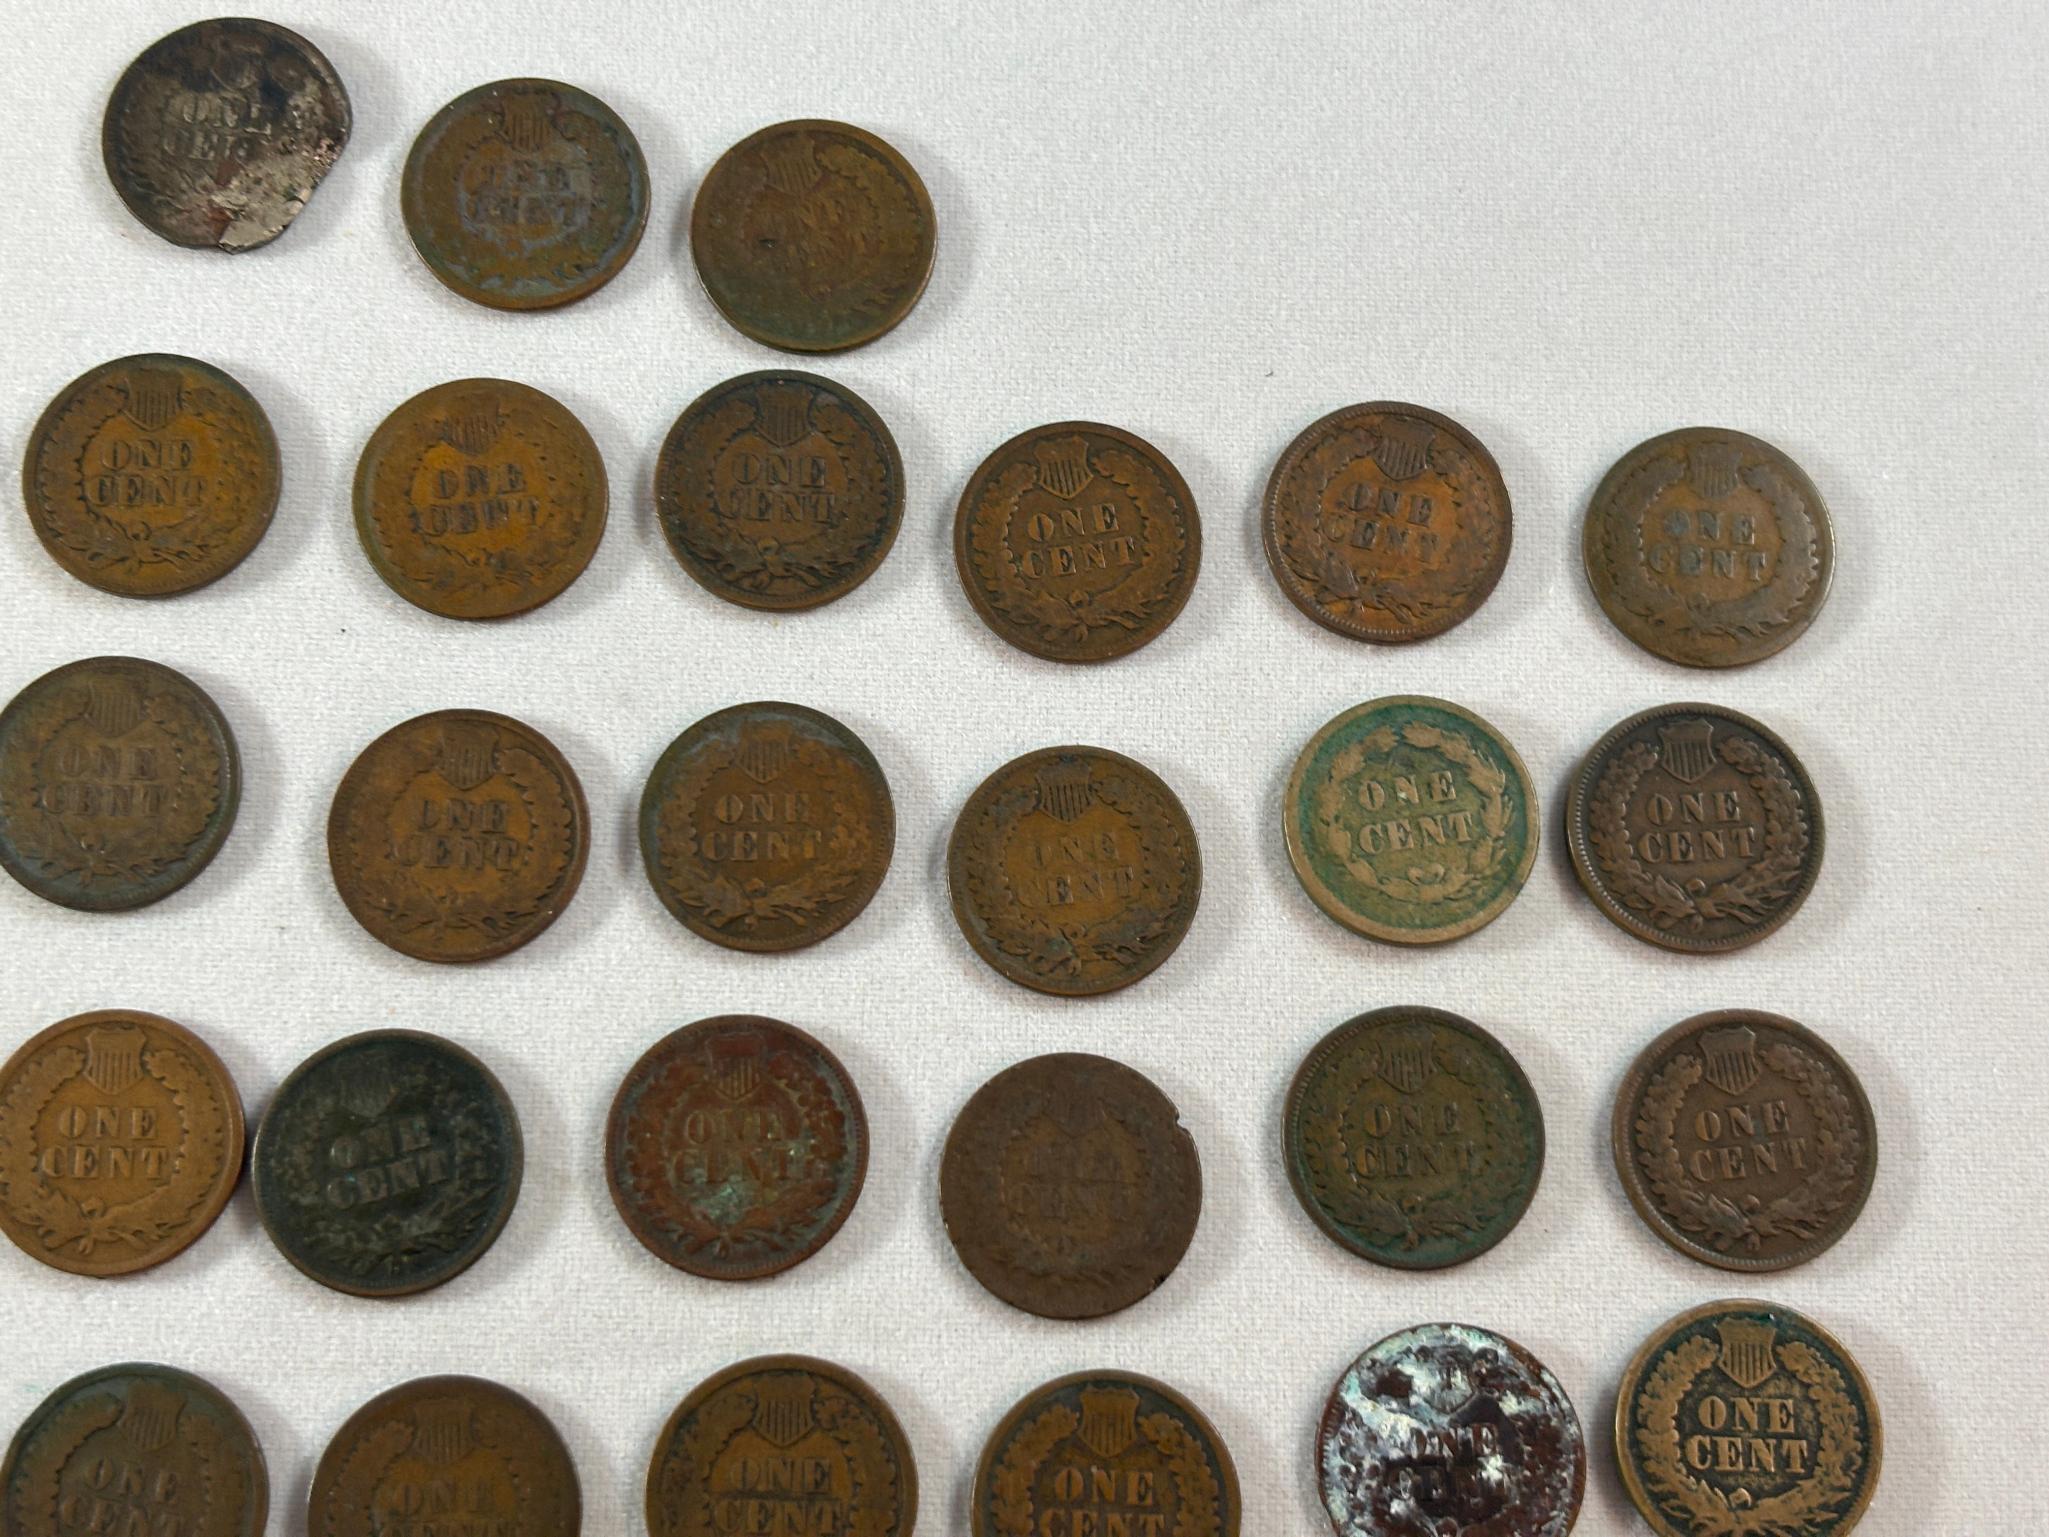 Large Lot of Indian Head Pennies including Key Dates